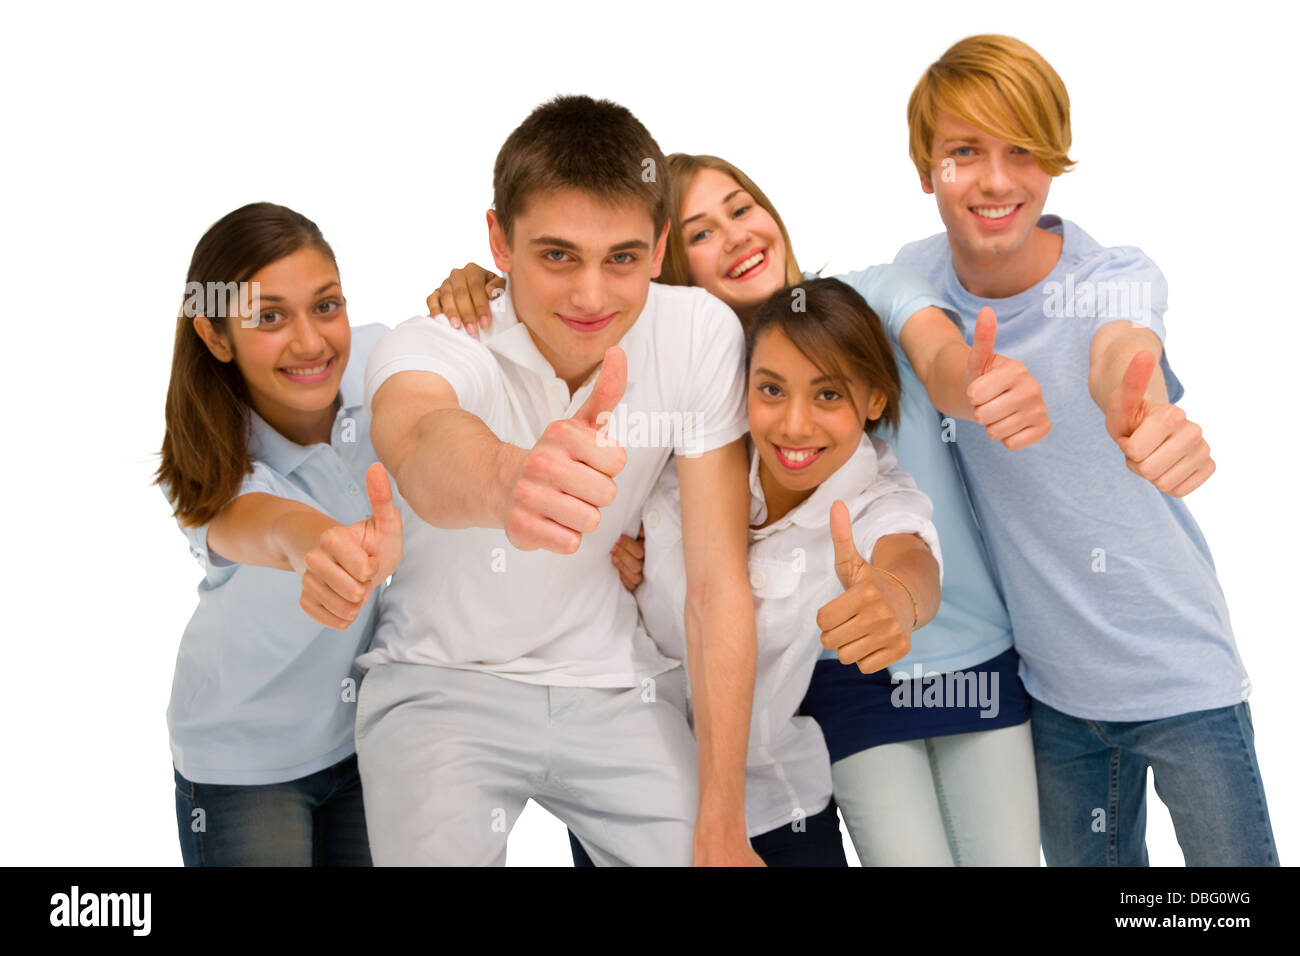 teenagers with thumbs up Stock Photo